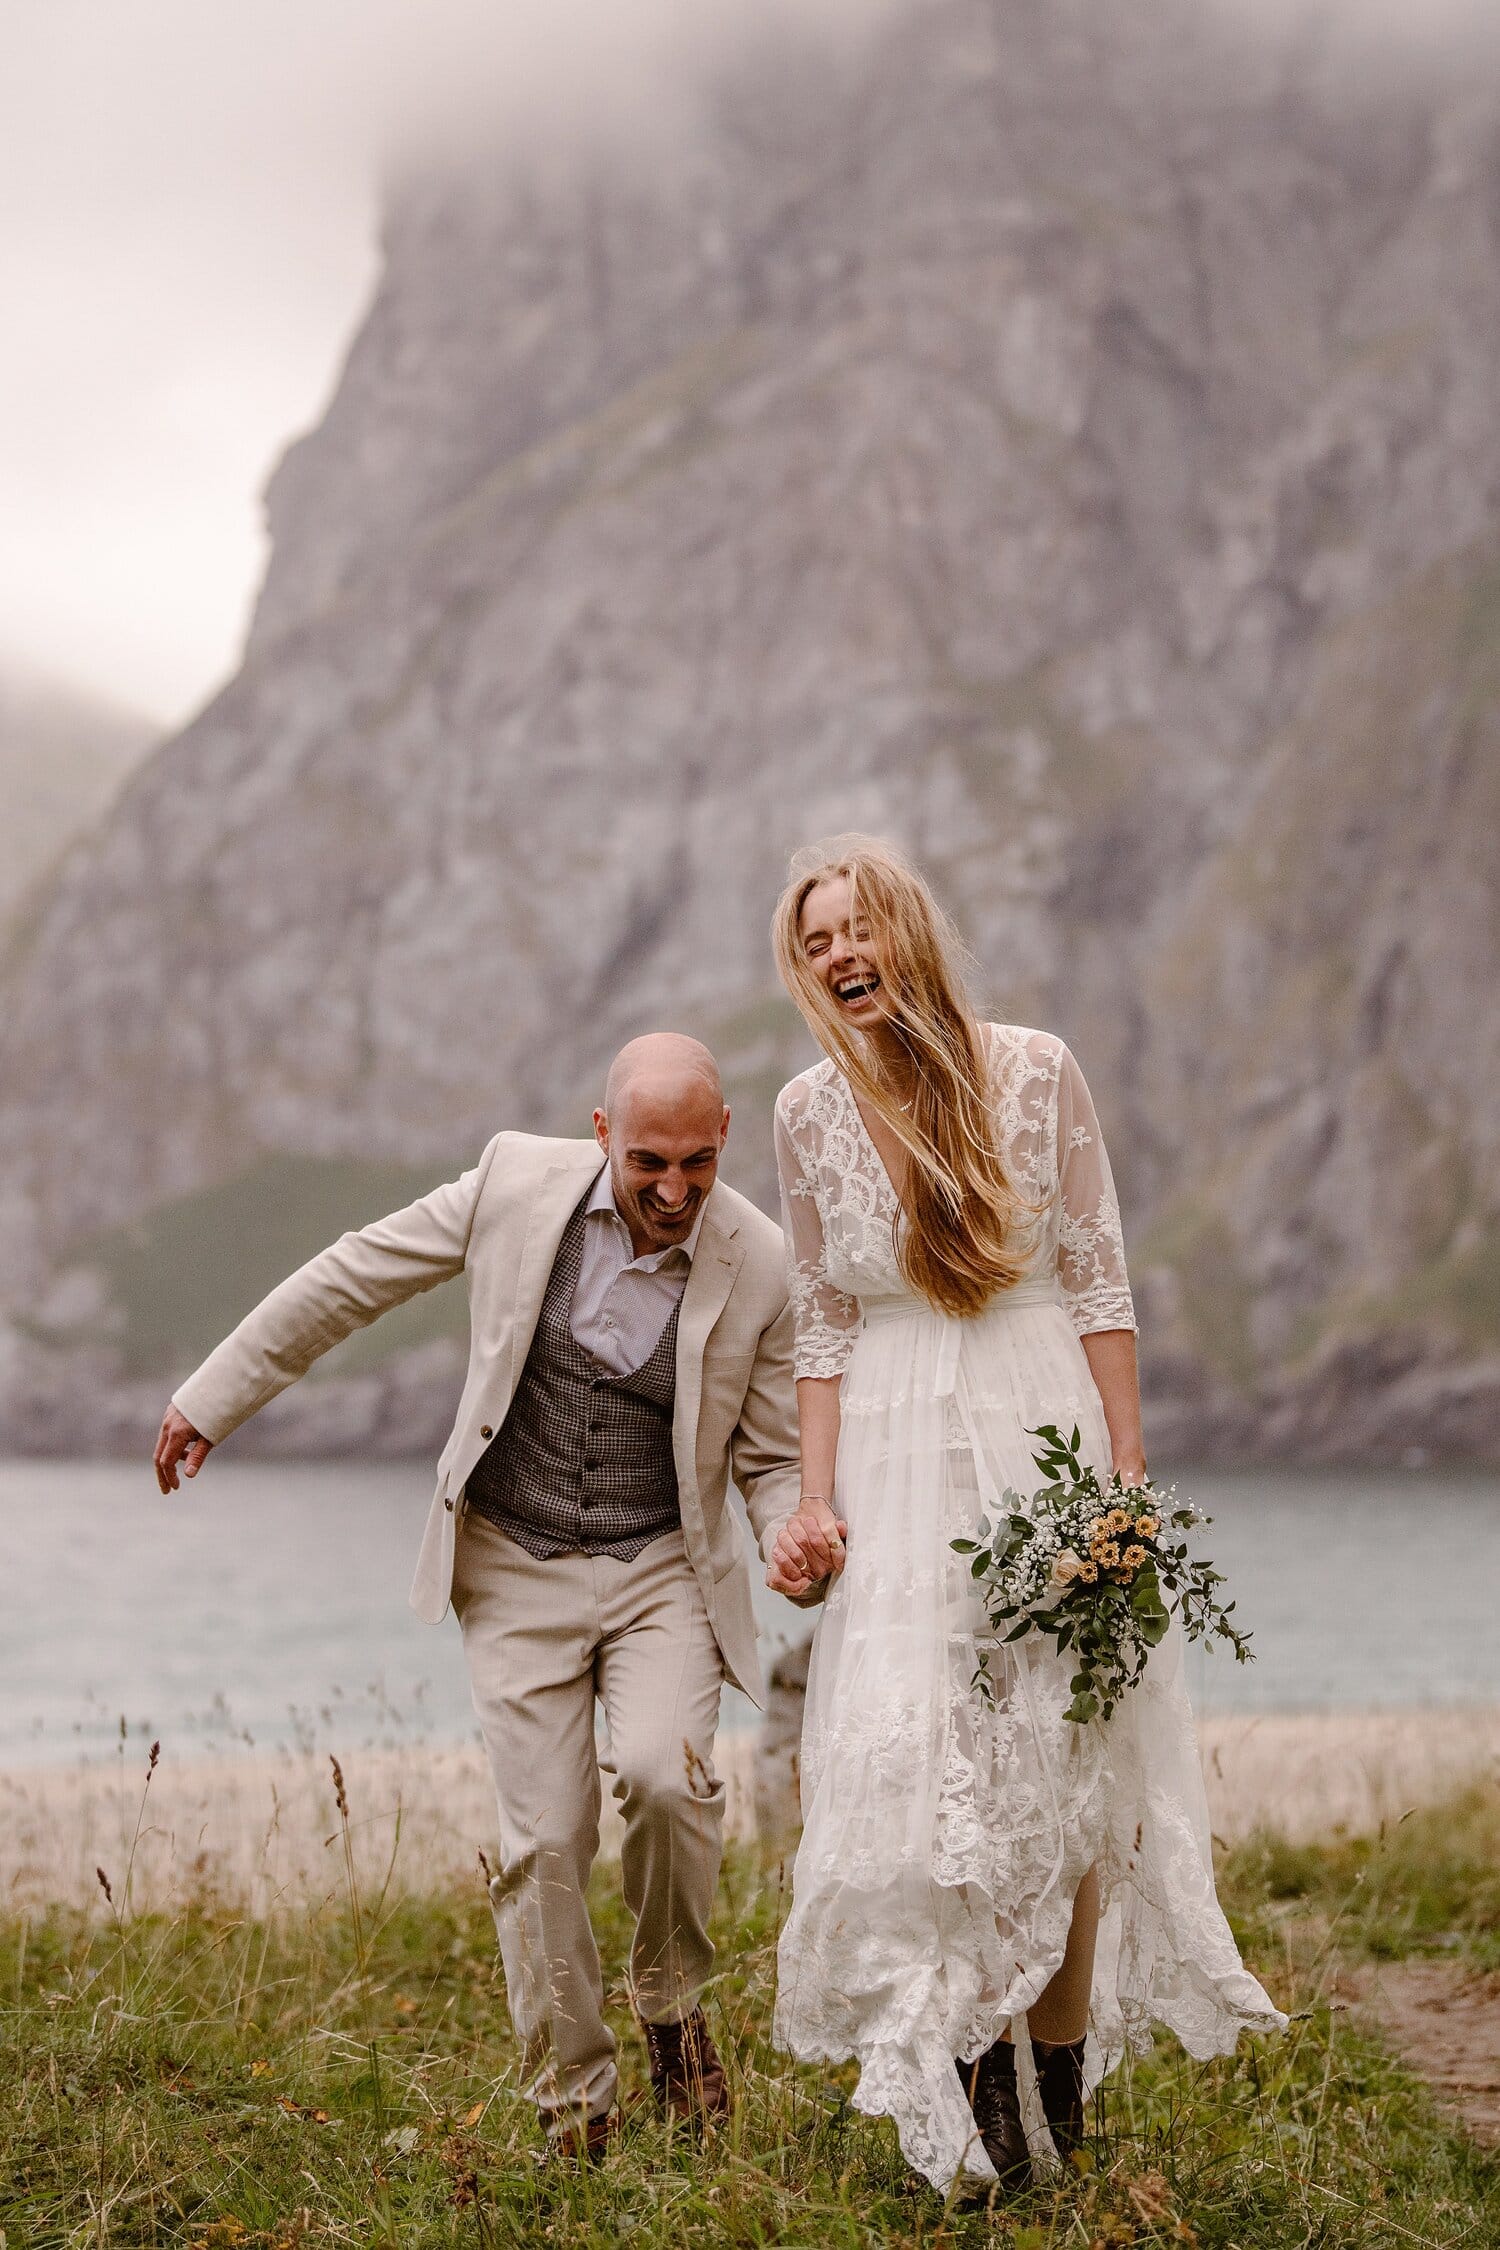 The bride and groom hold hands while laughing together on their elopement day, at a beach in Norway